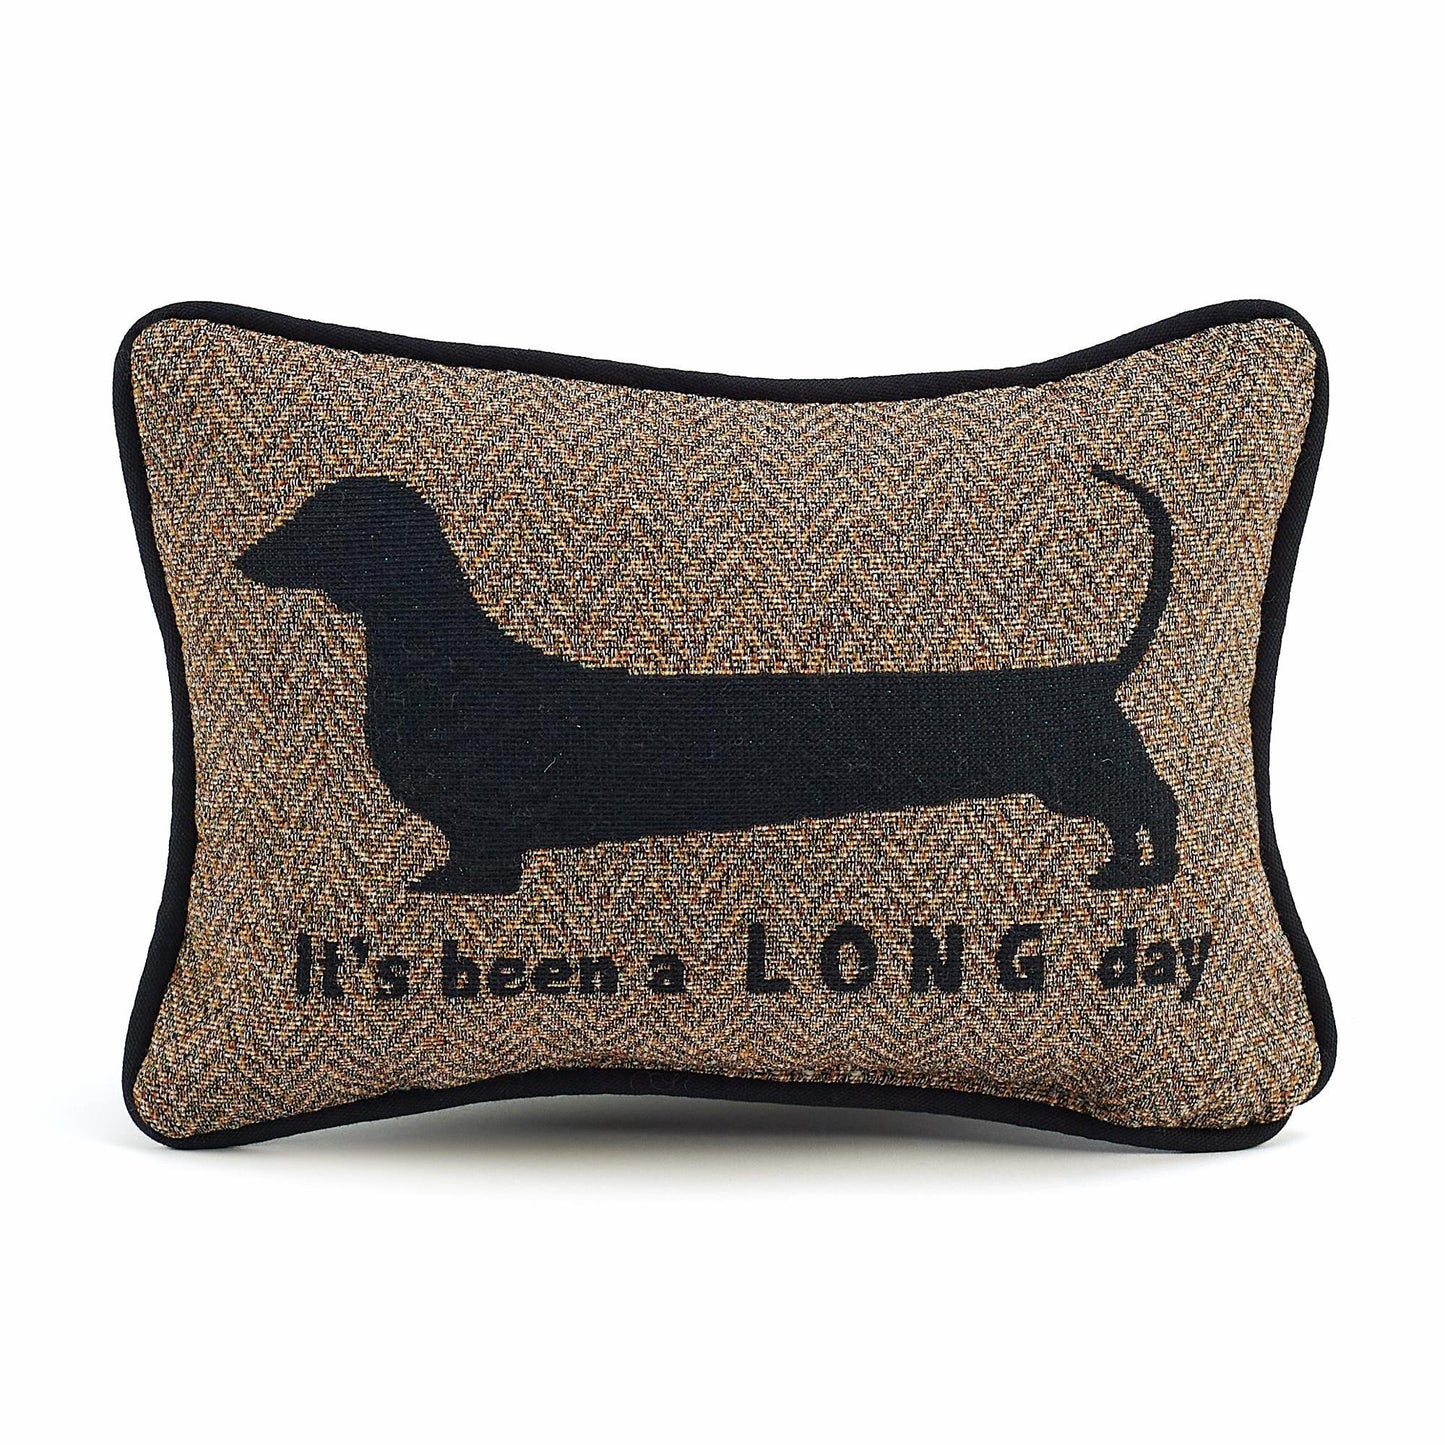 Darling Dachshund—Long Day Decorative Pillow - Wild Wings